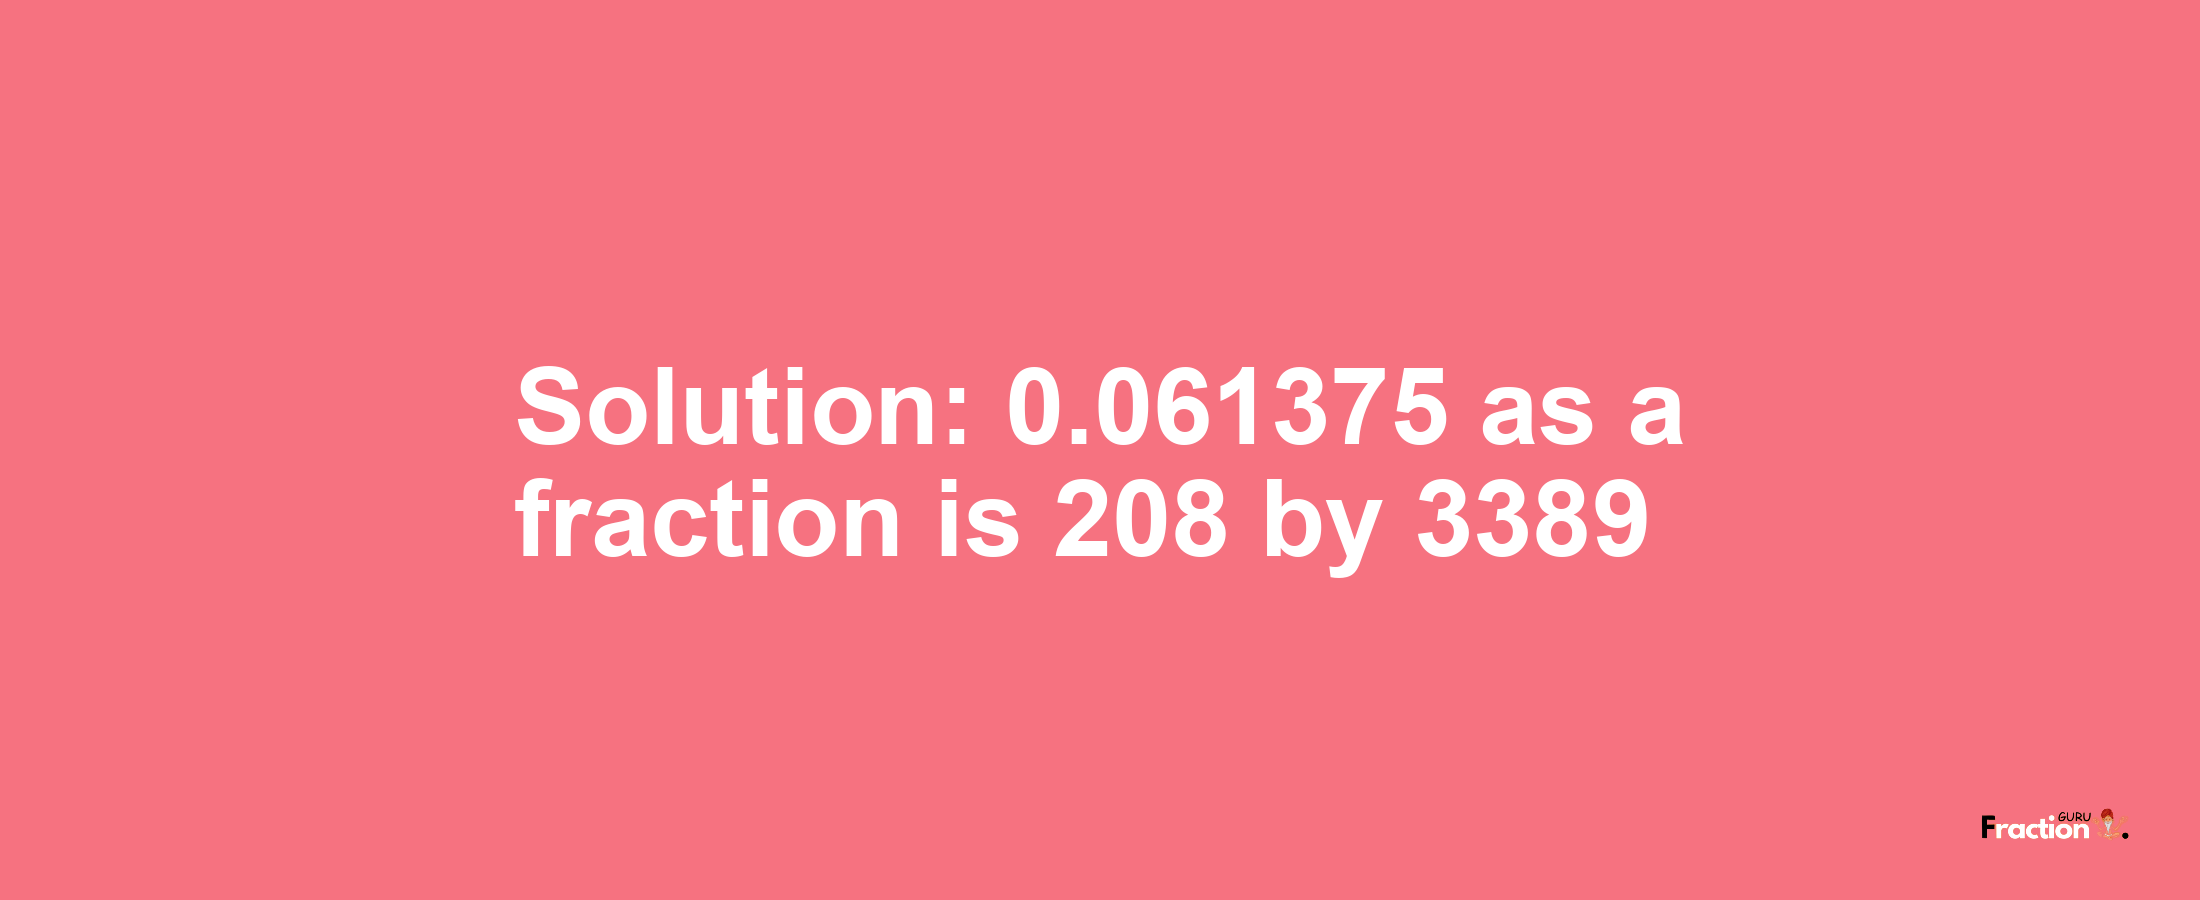 Solution:0.061375 as a fraction is 208/3389